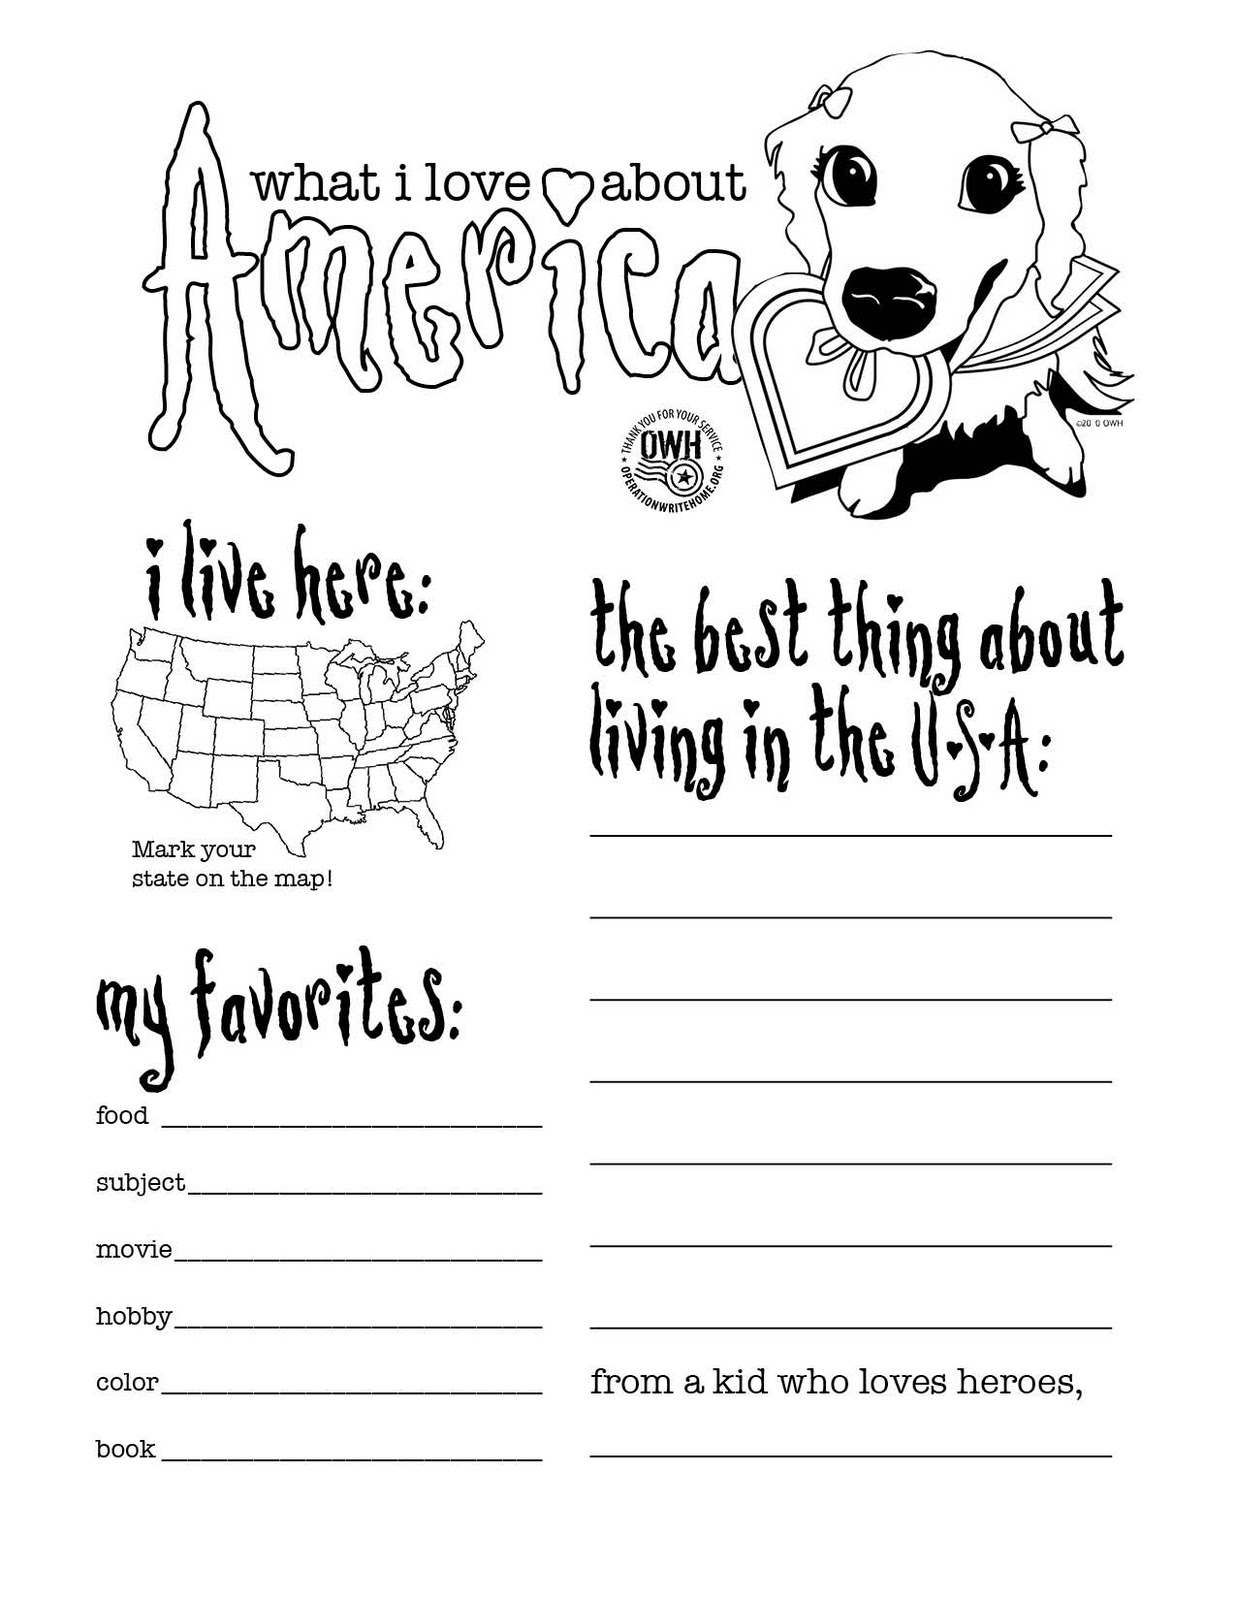 Teacher appreciation coloring pages to download and print for free